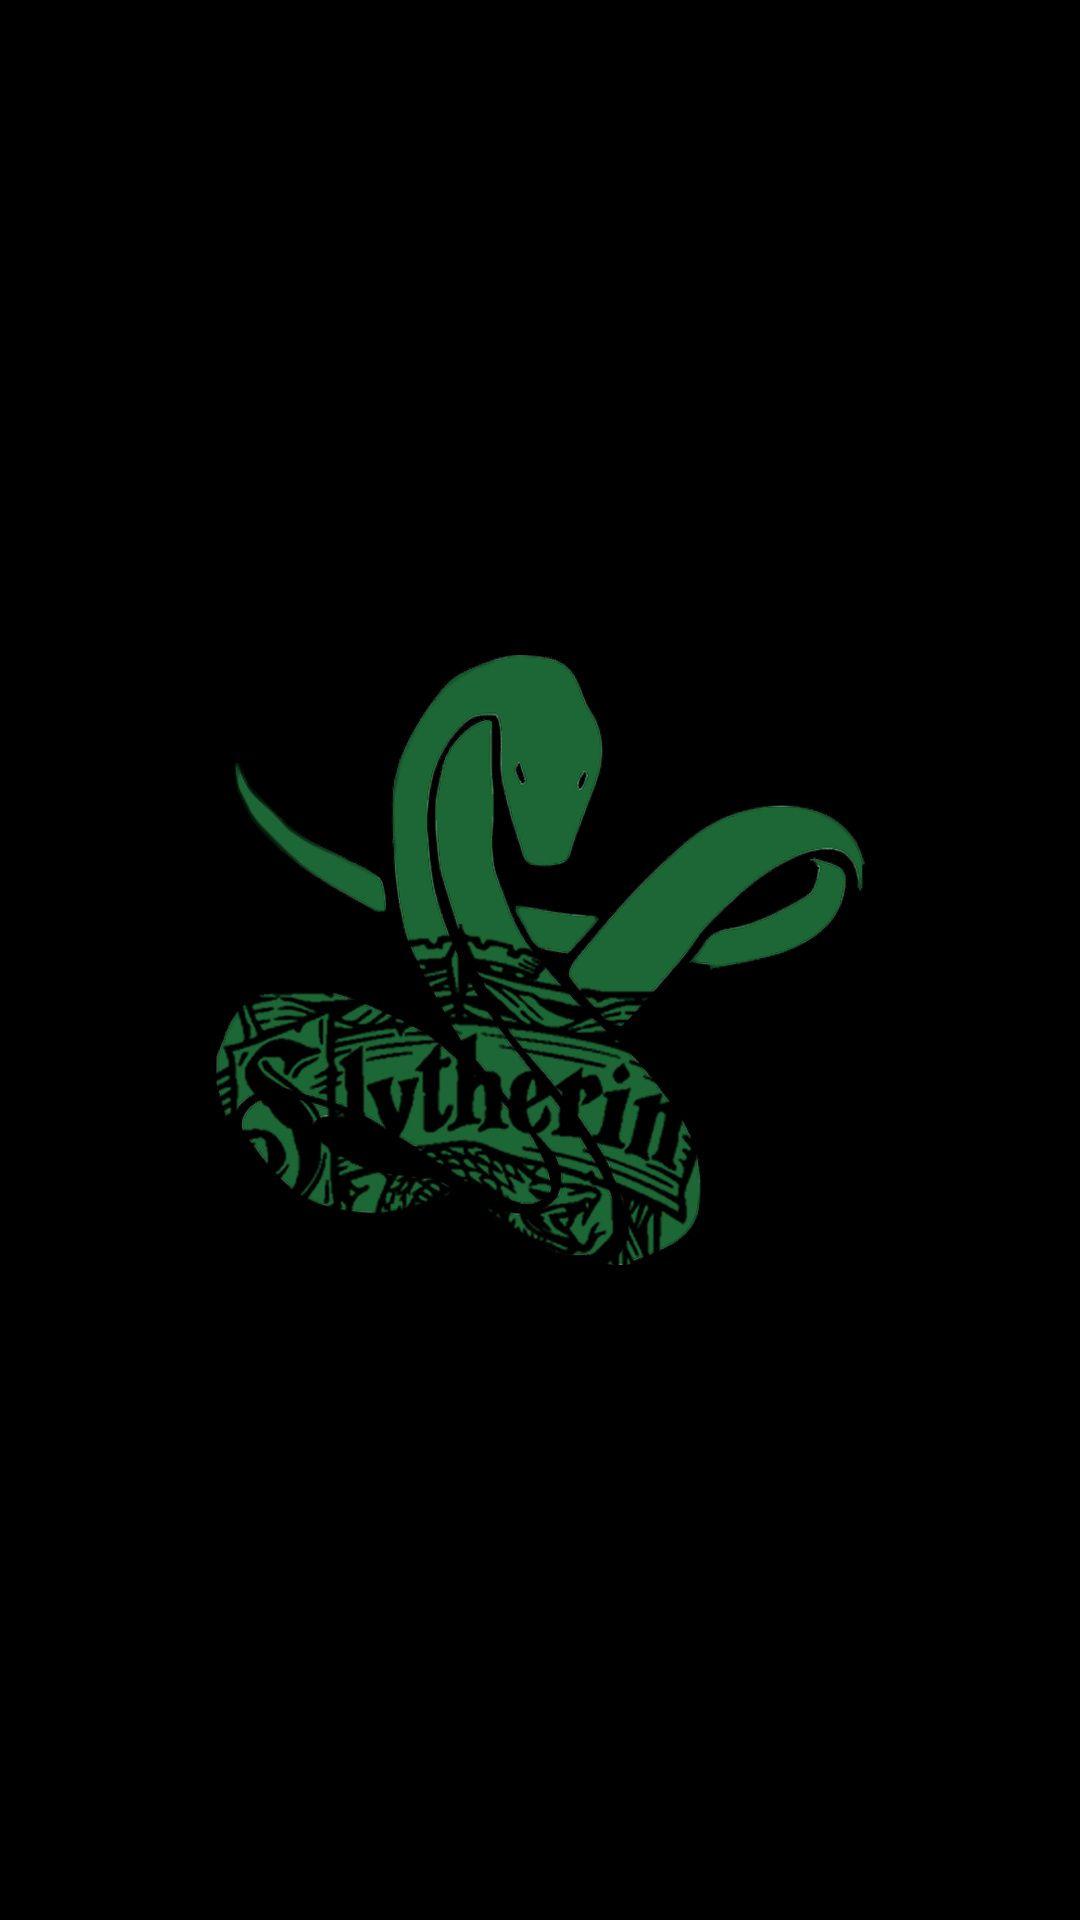 Live Wallpaper for iPhone Best Of Slytherin iPhone 7 Wallpaper 2018